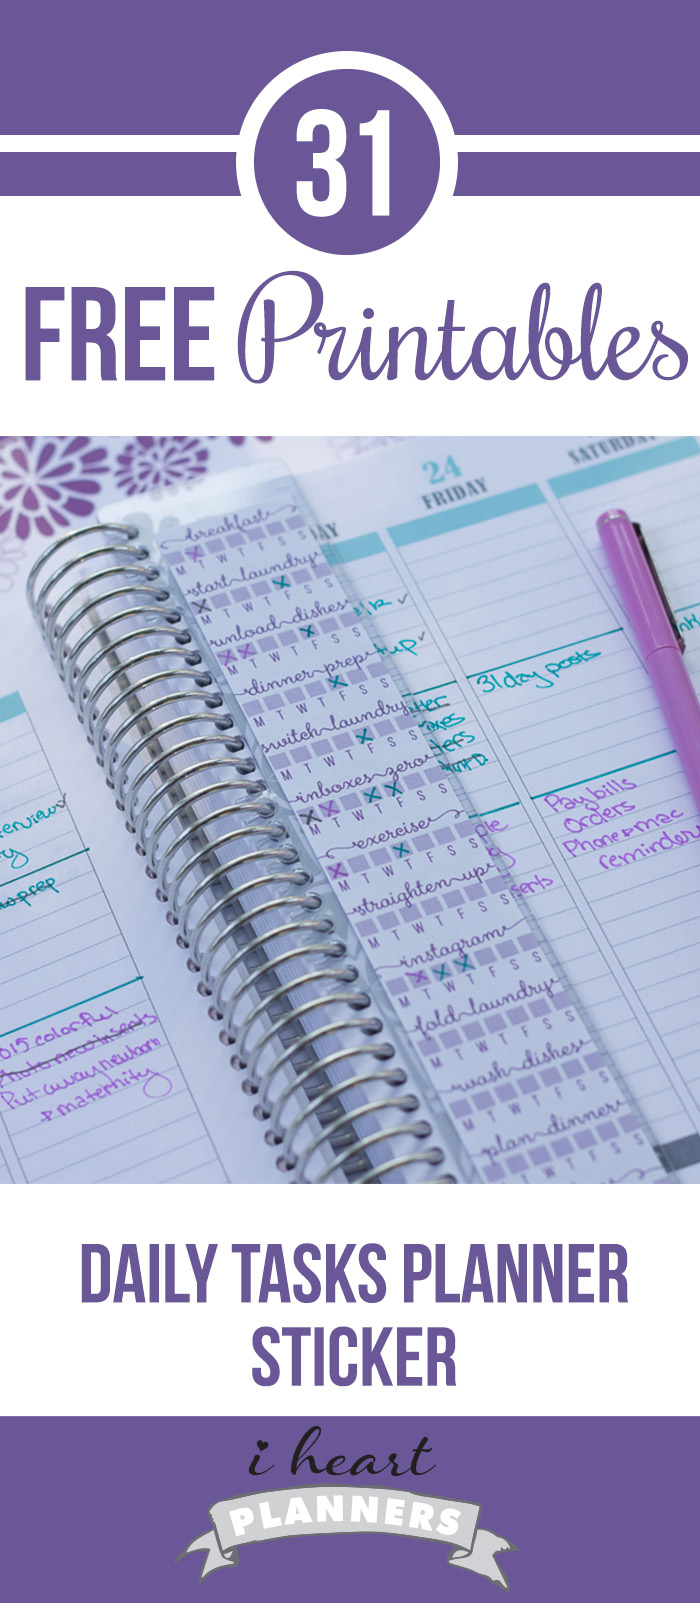 Free printable daily checklist printable for life planners. I use it on an Erin Condren bookmark that fits perfectly in my Plum Paper planner.